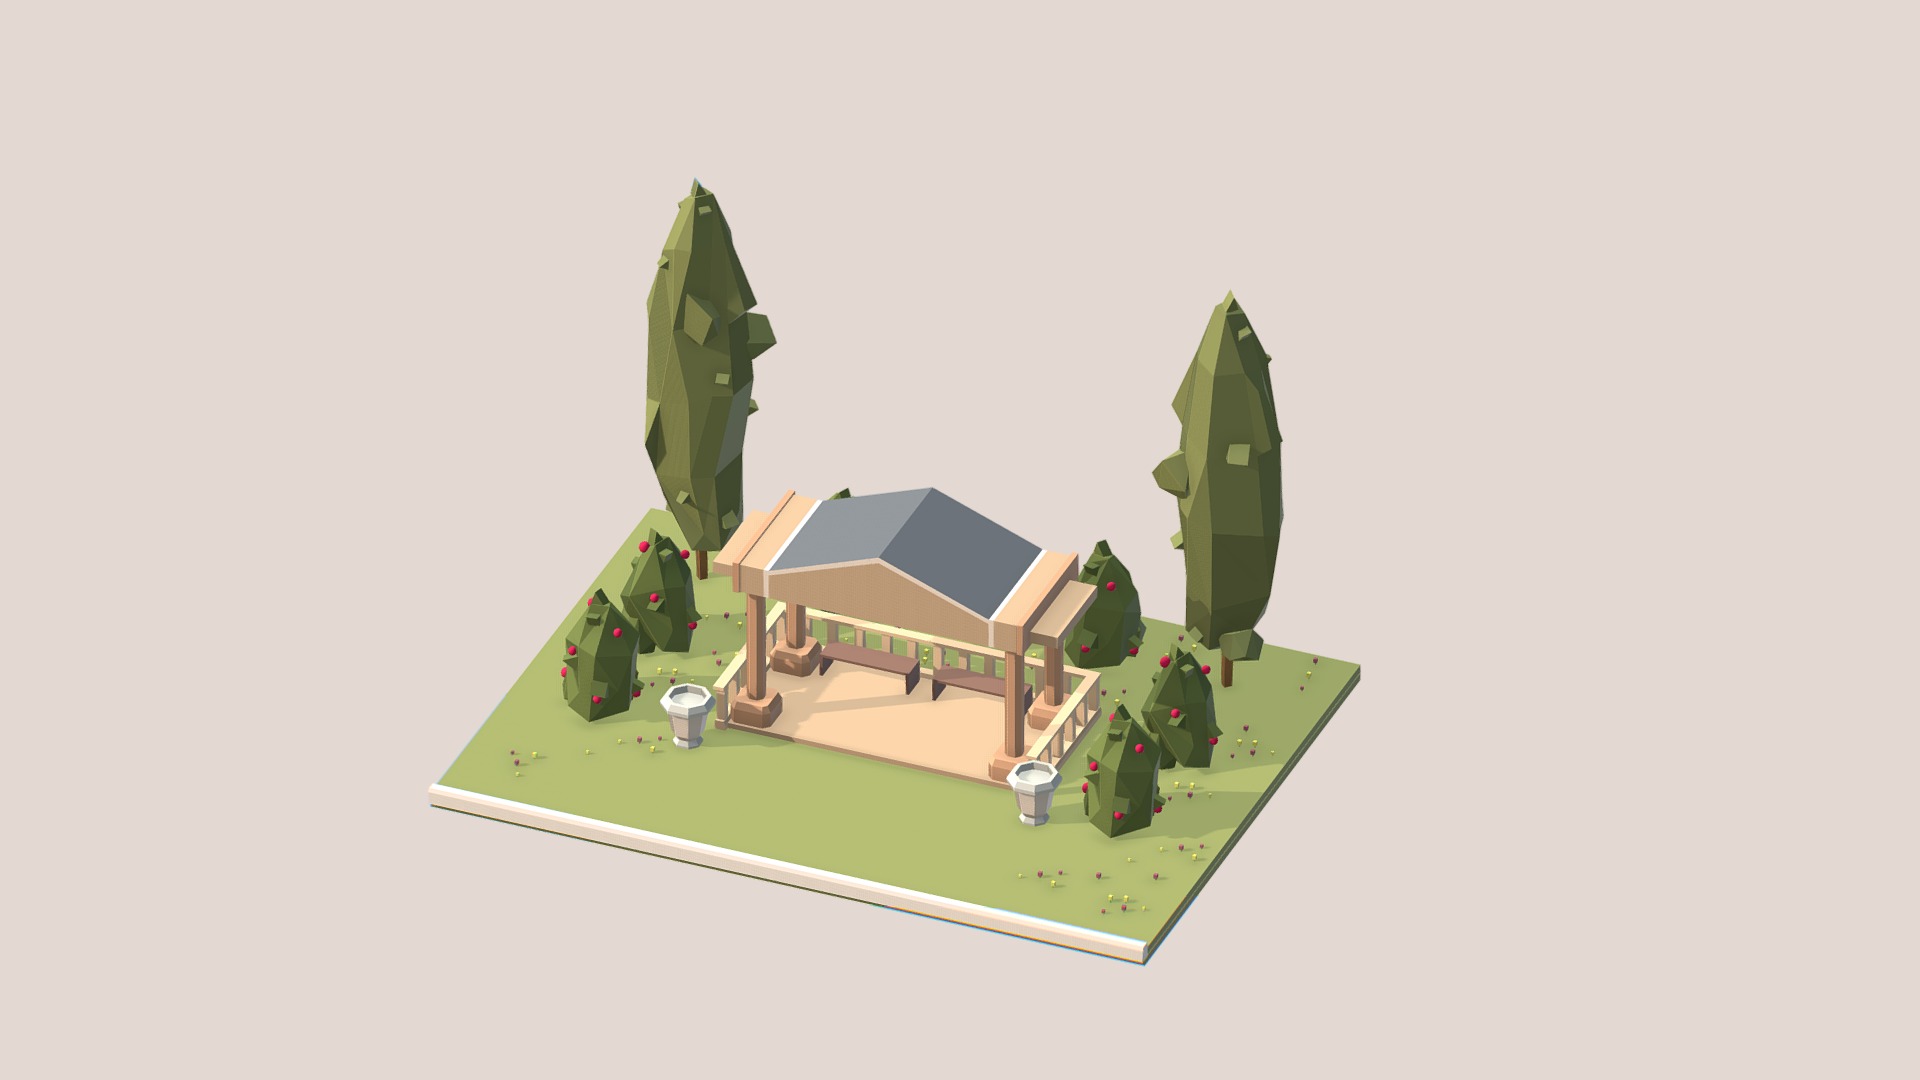 3D model Ethnic Buildings 05 - This is a 3D model of the Ethnic Buildings 05. The 3D model is about a toy house with a green roof.